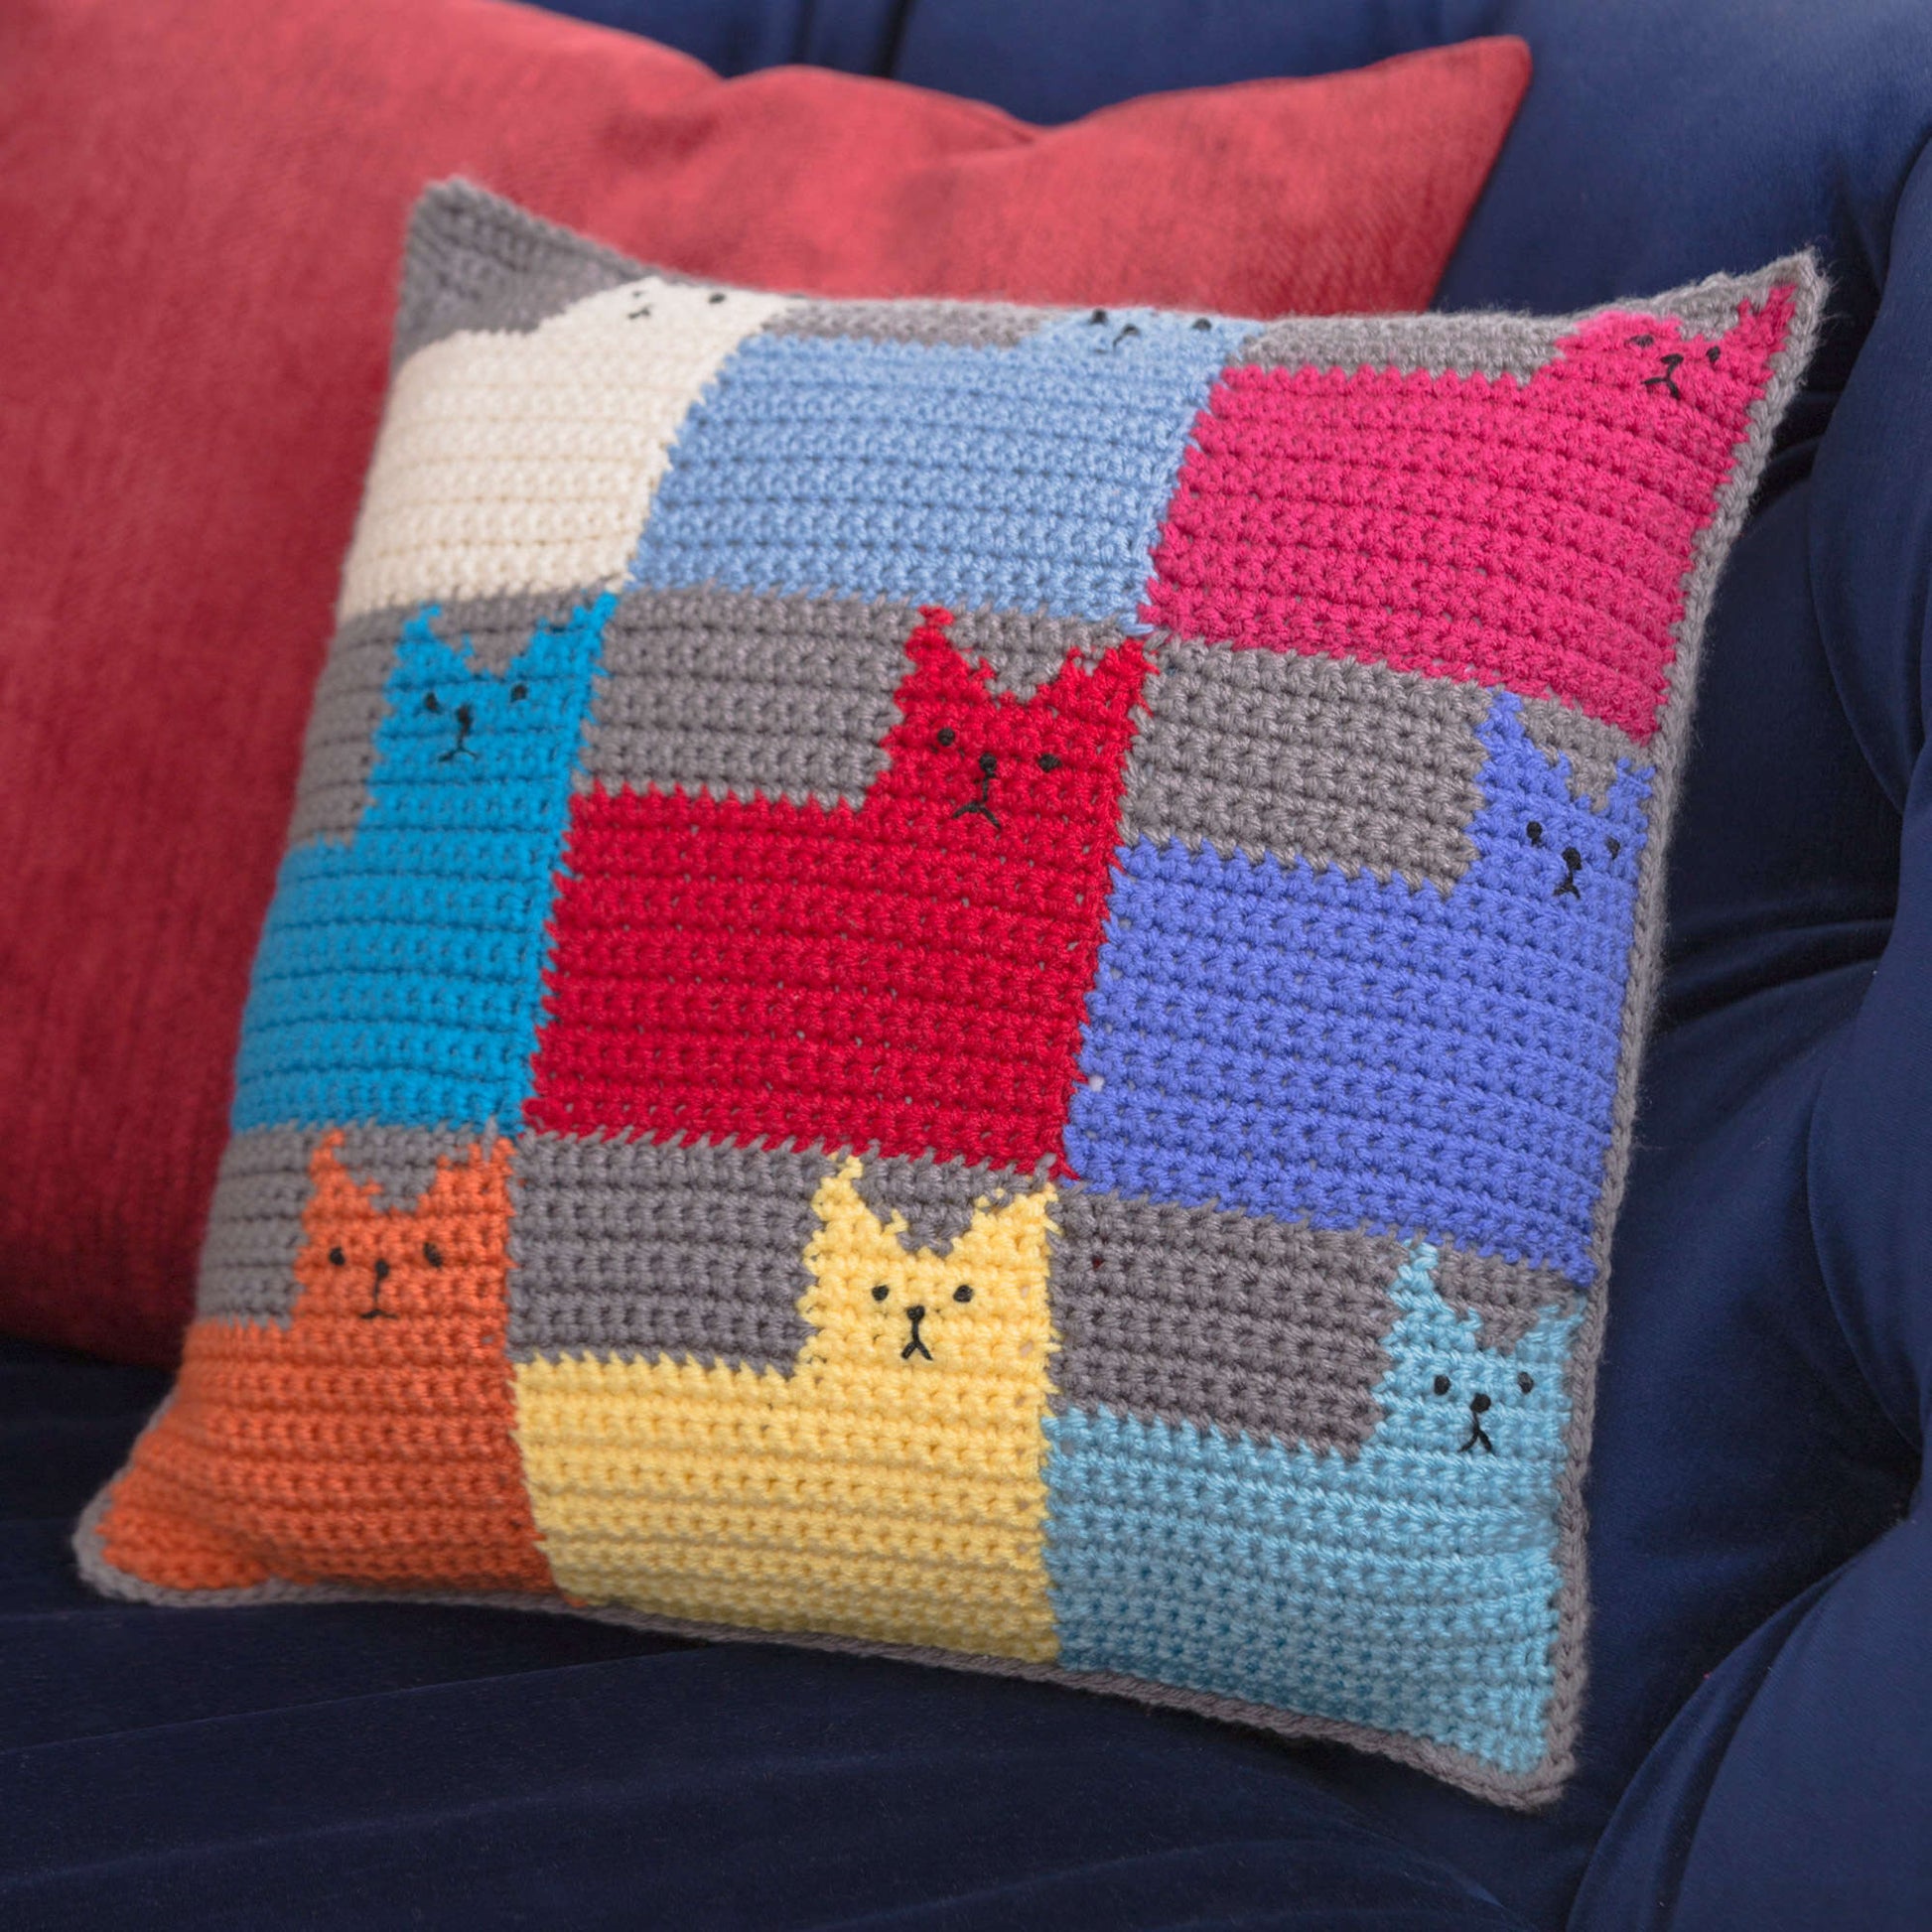 Free Red Heart Kittens And Puppies For Sale Pillows Crochet Pattern